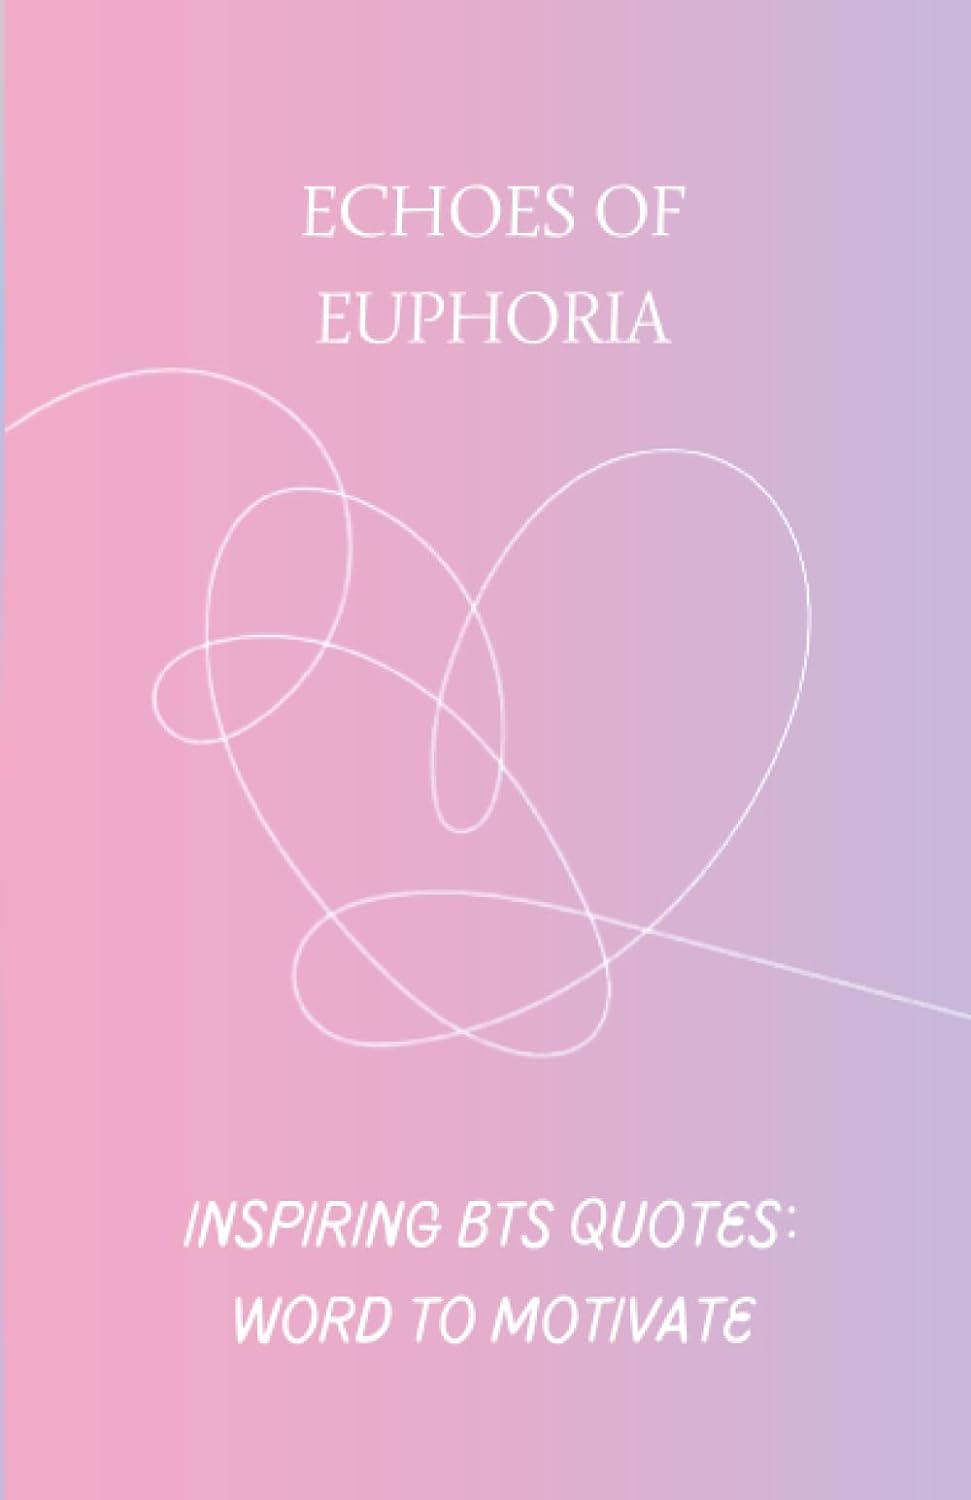 Echoes of Euphoria: Inspiring BTS Quotes: Words to Motivate by Megane Rafiou